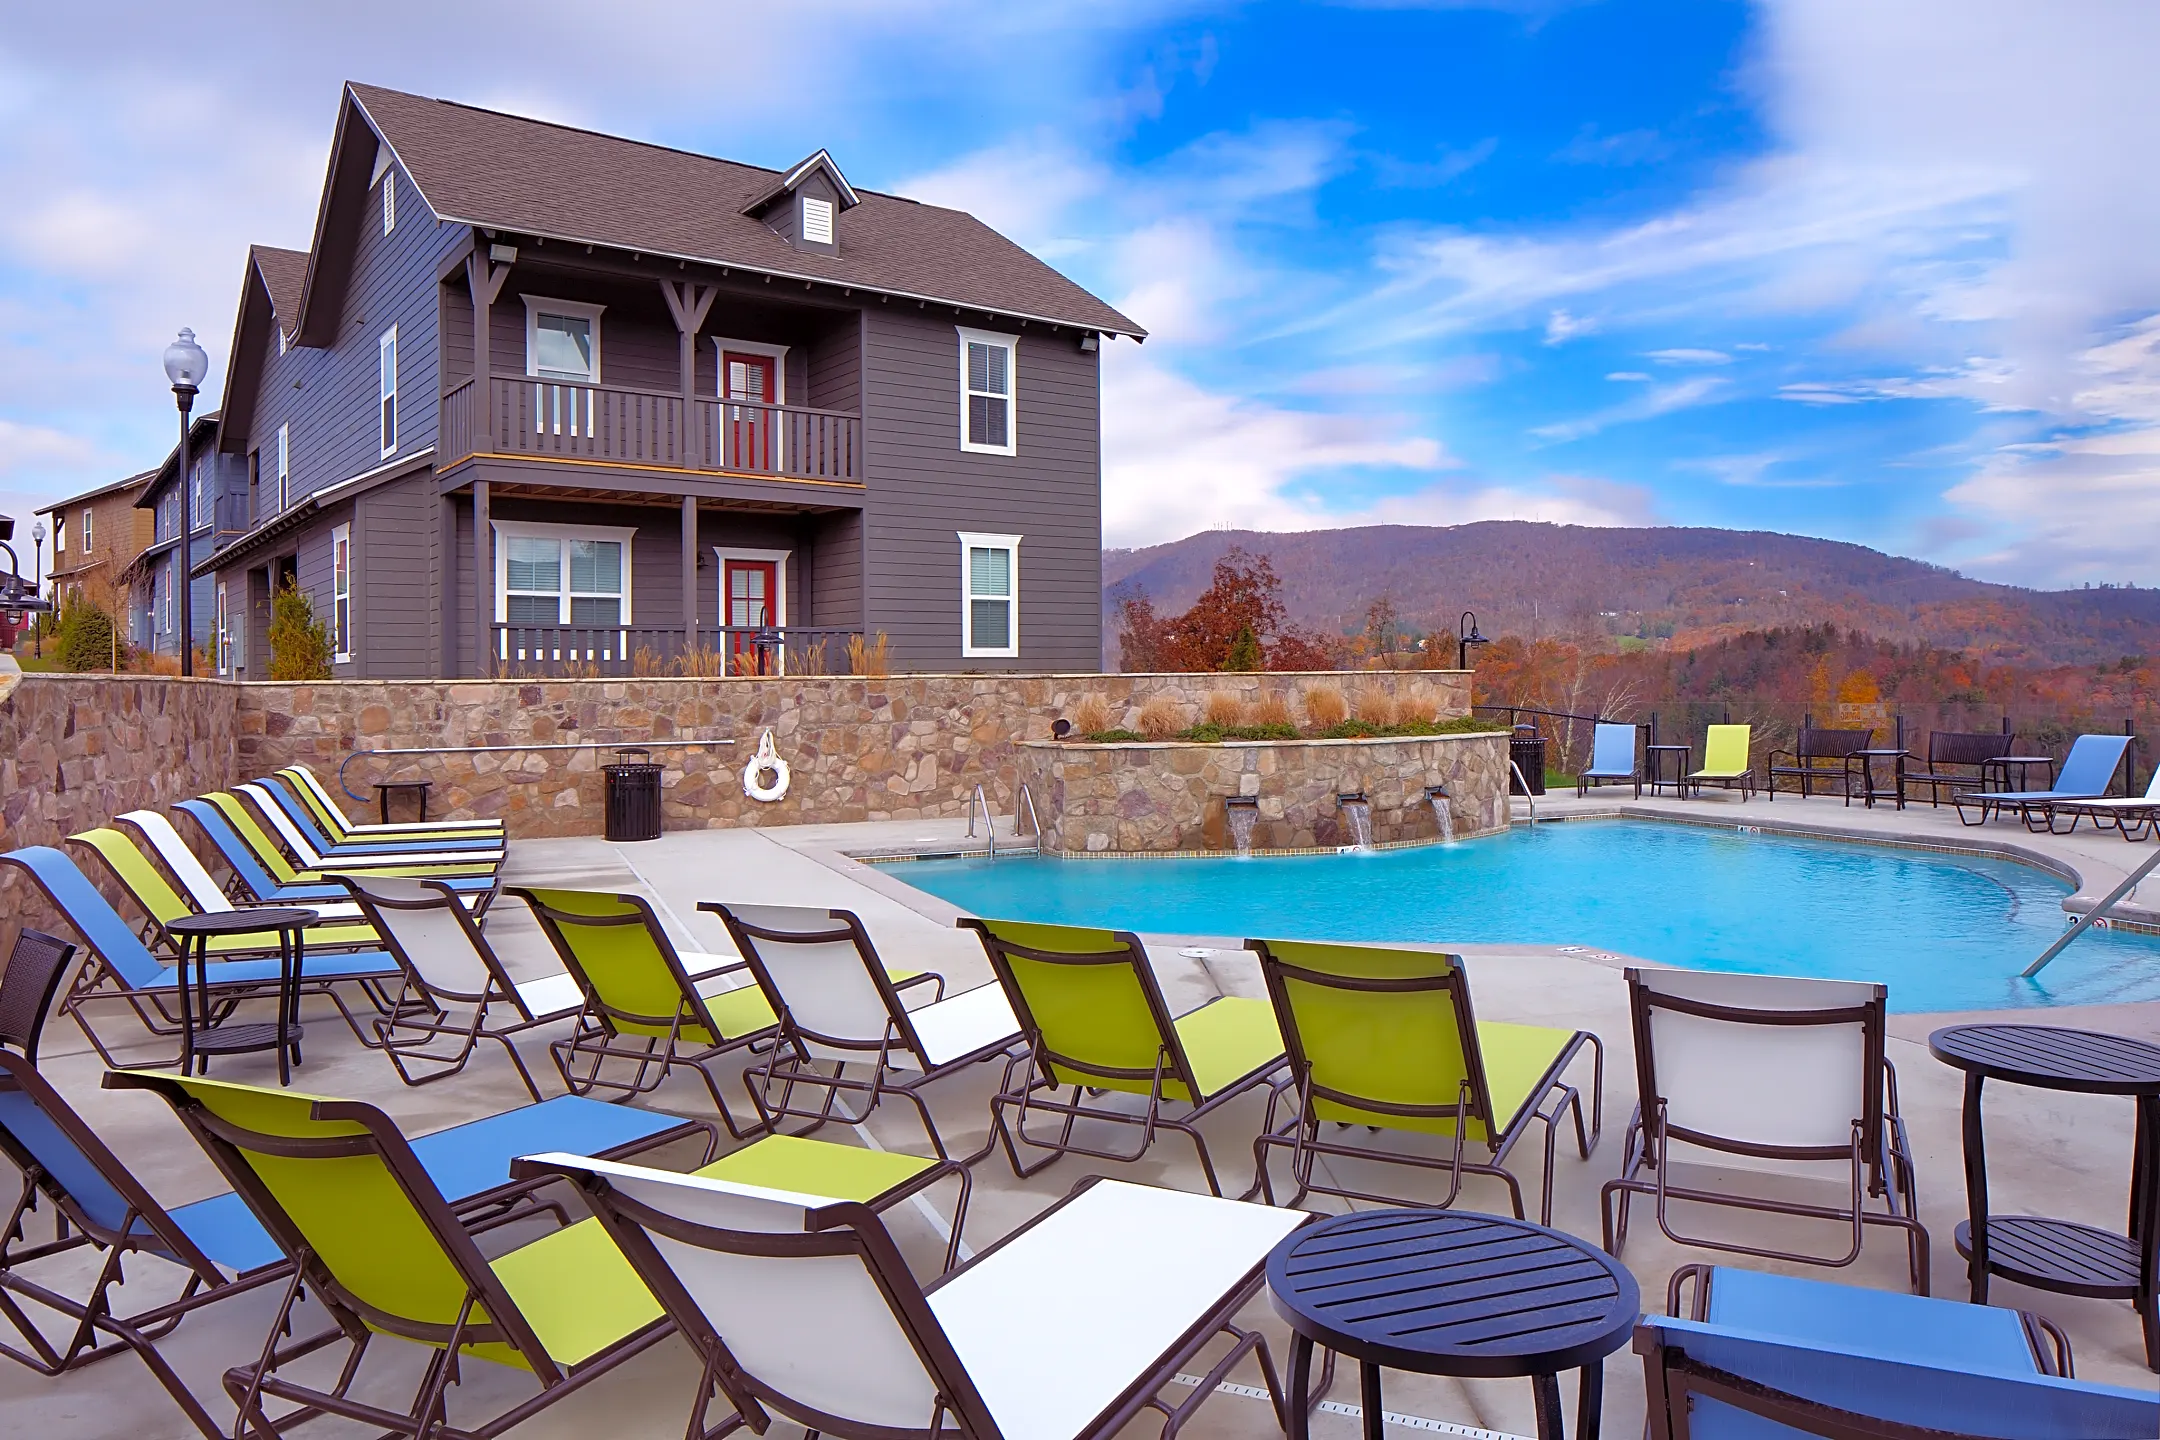 Pool - The Cottages of Boone - Per Bed Lease - Boone, NC